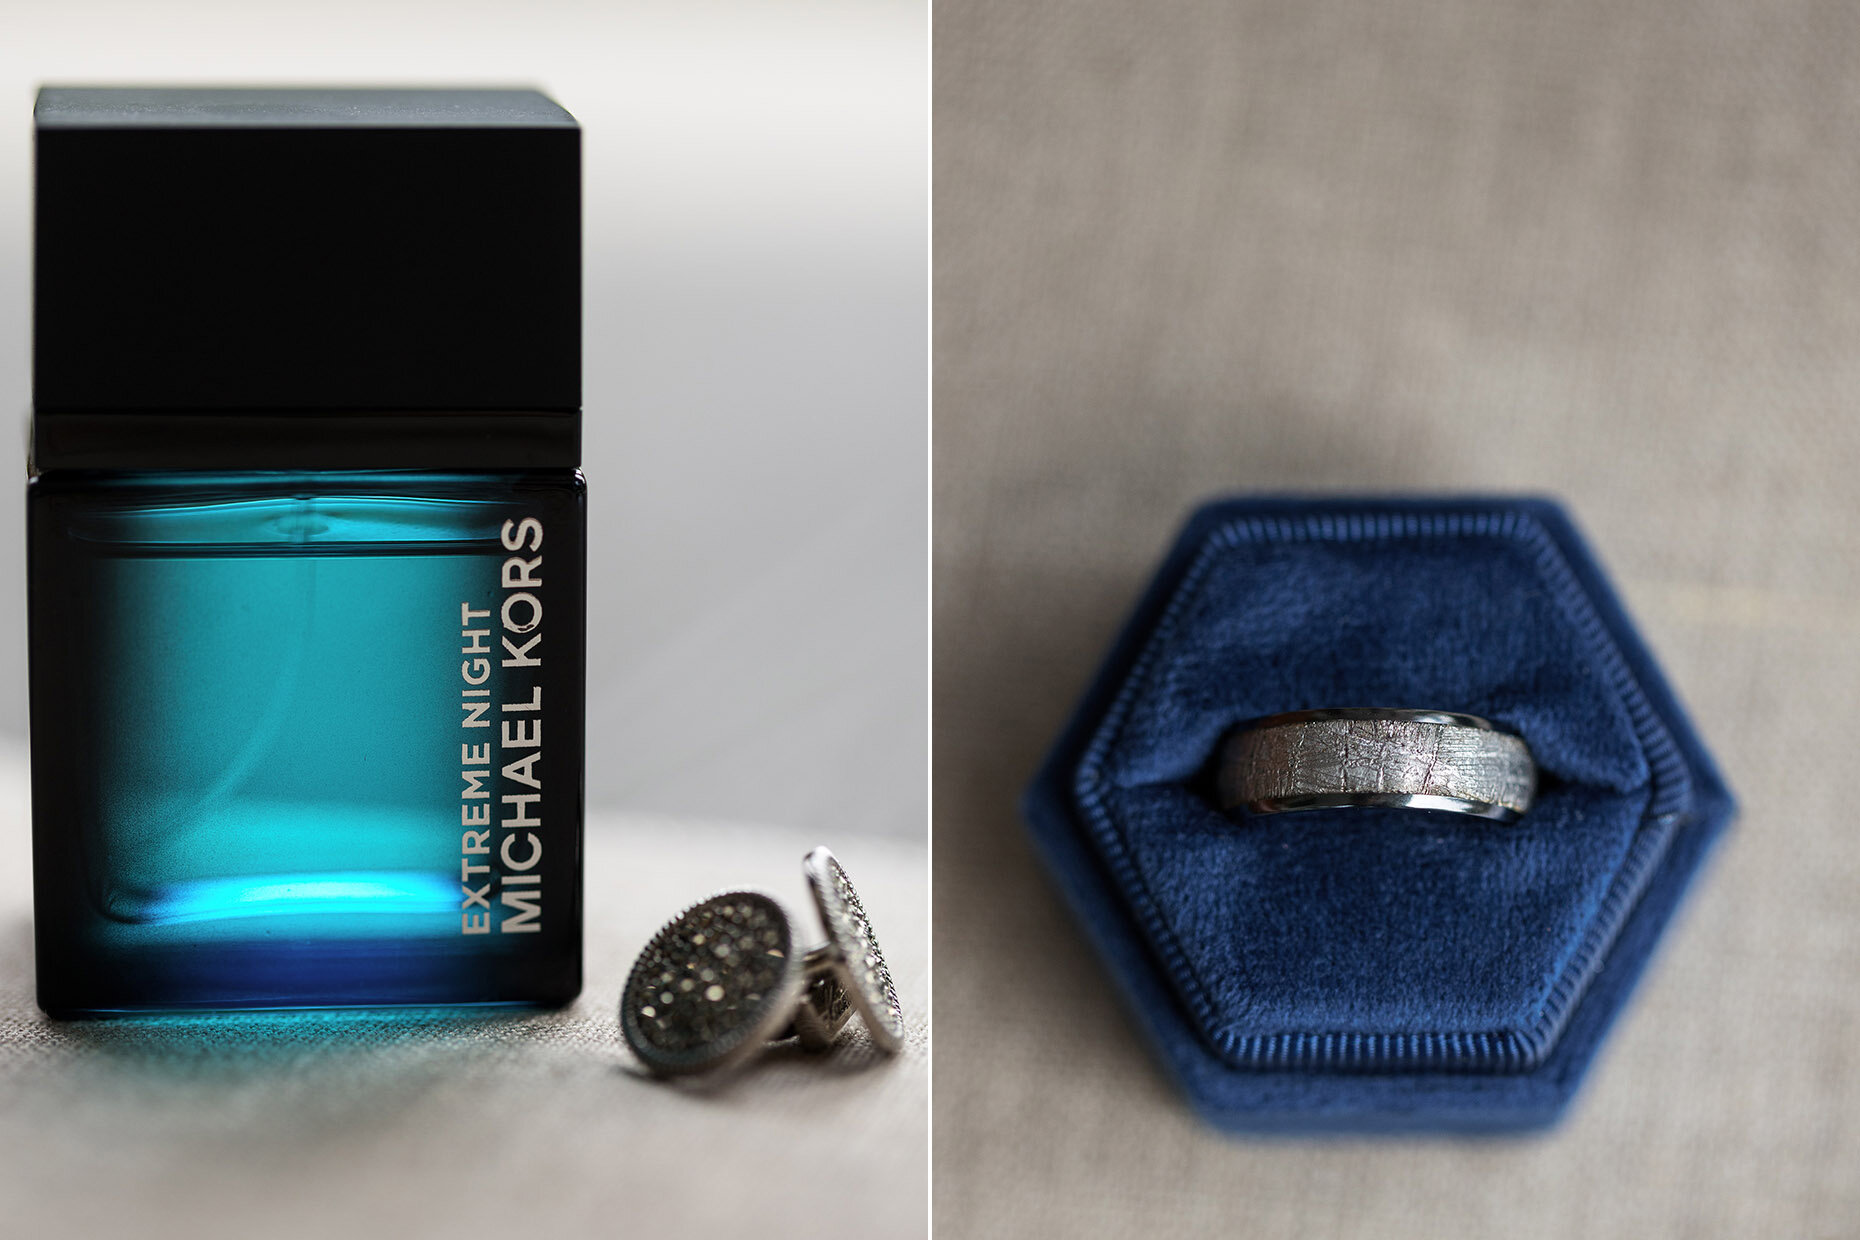 Groom’s cologne, cufflinks and ring details